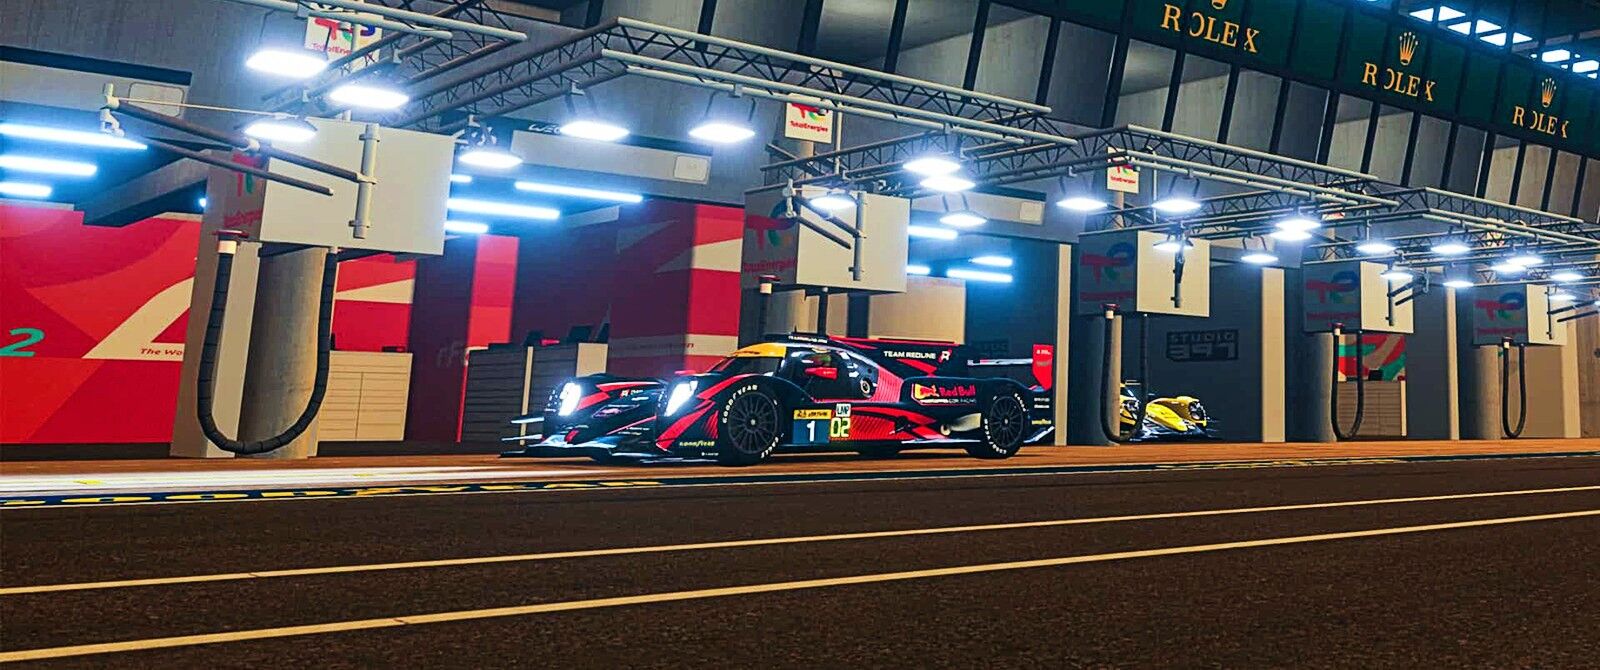 An Oreca 07 in a pitbox at the Circuit de la Sarthe during the night with lights illuminating the surrounding area.